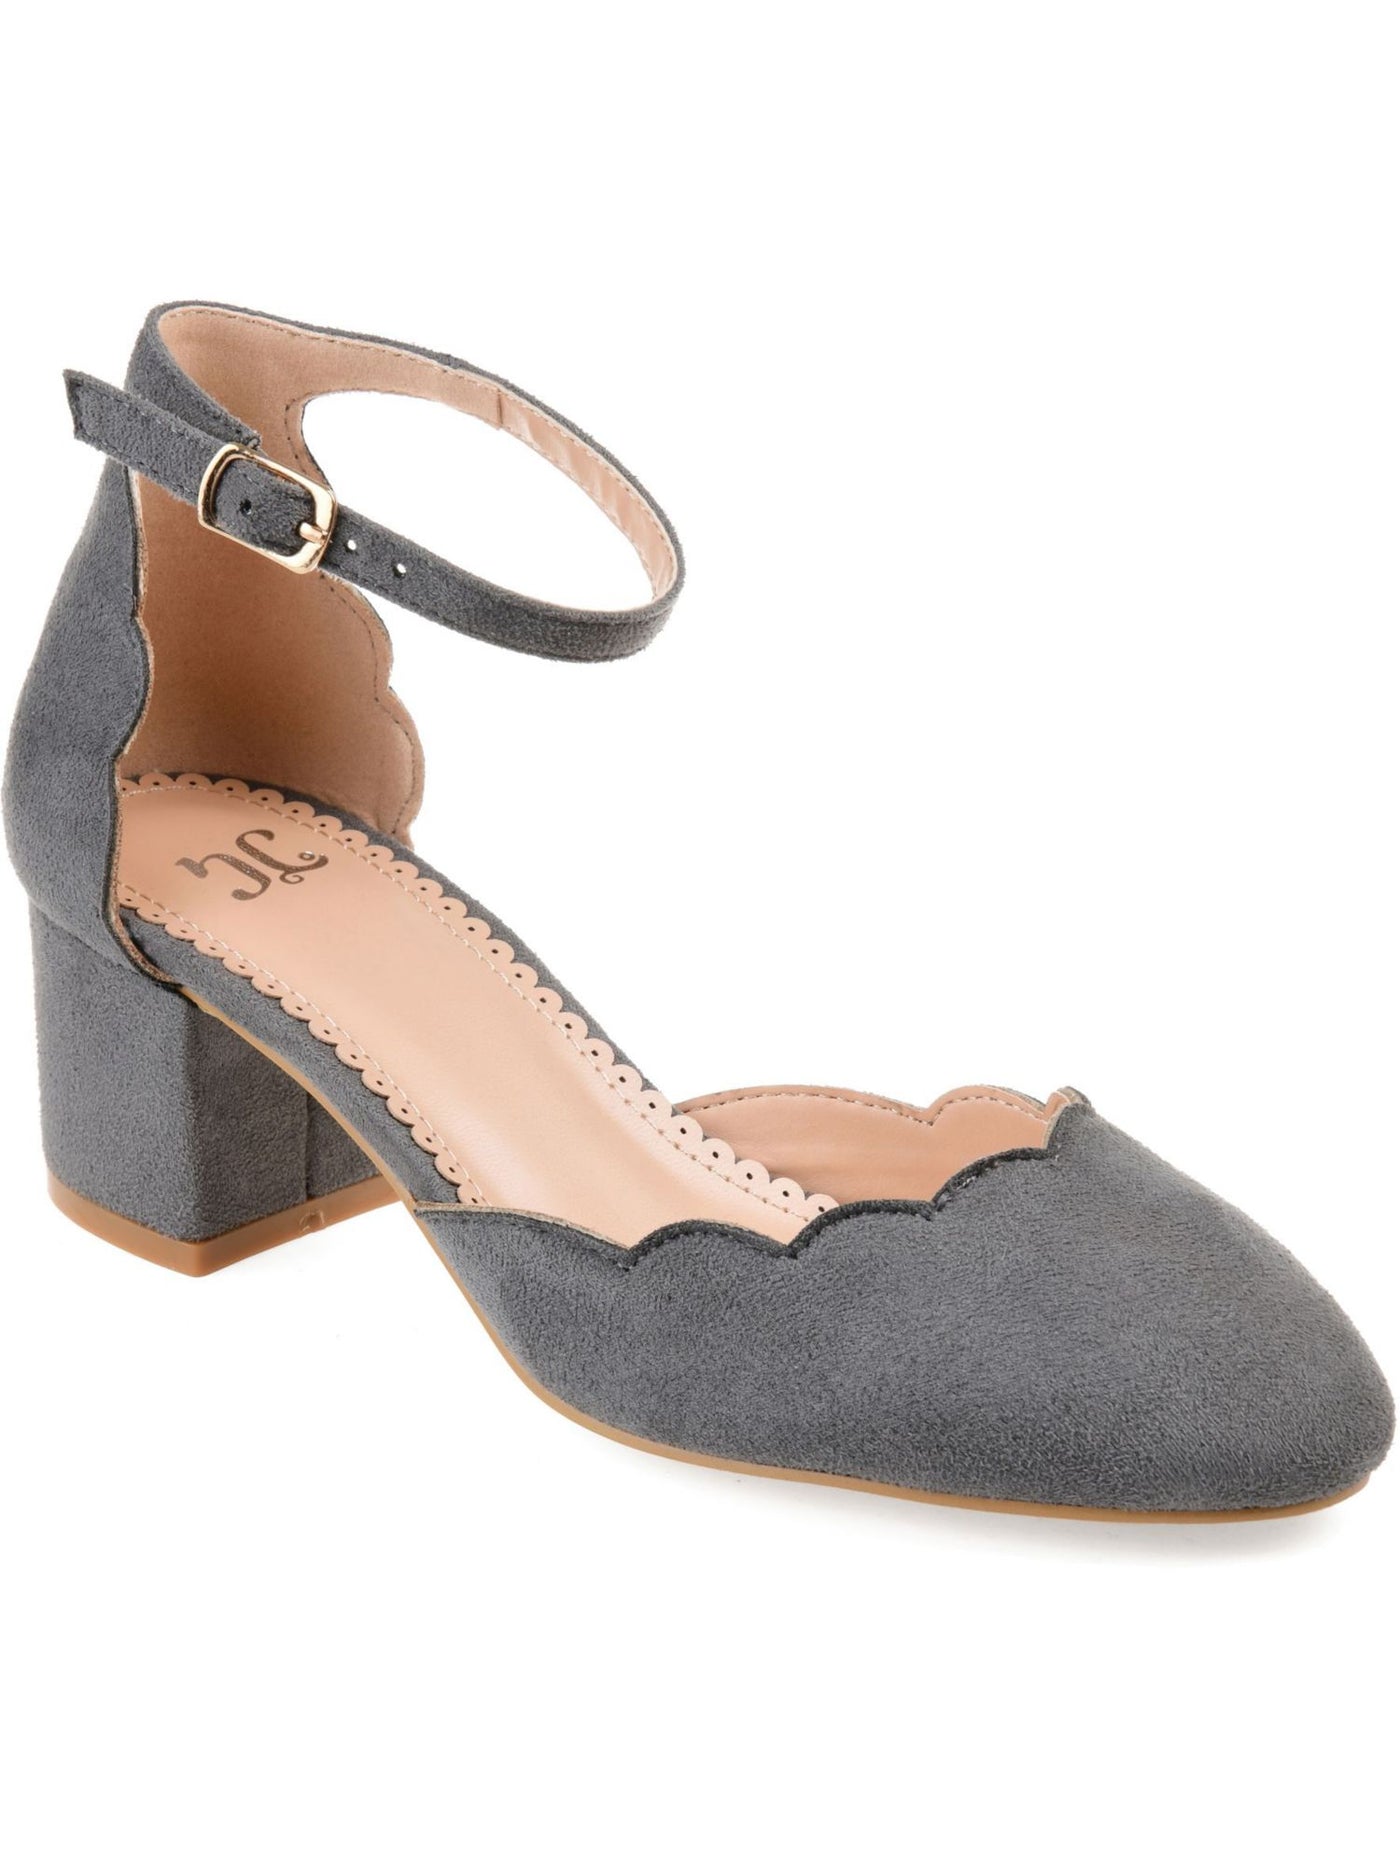 JOURNEE COLLECTION Womens Gray Scalloped Ankle Strap Edna Round Toe Block Heel Buckle Pumps Shoes 10